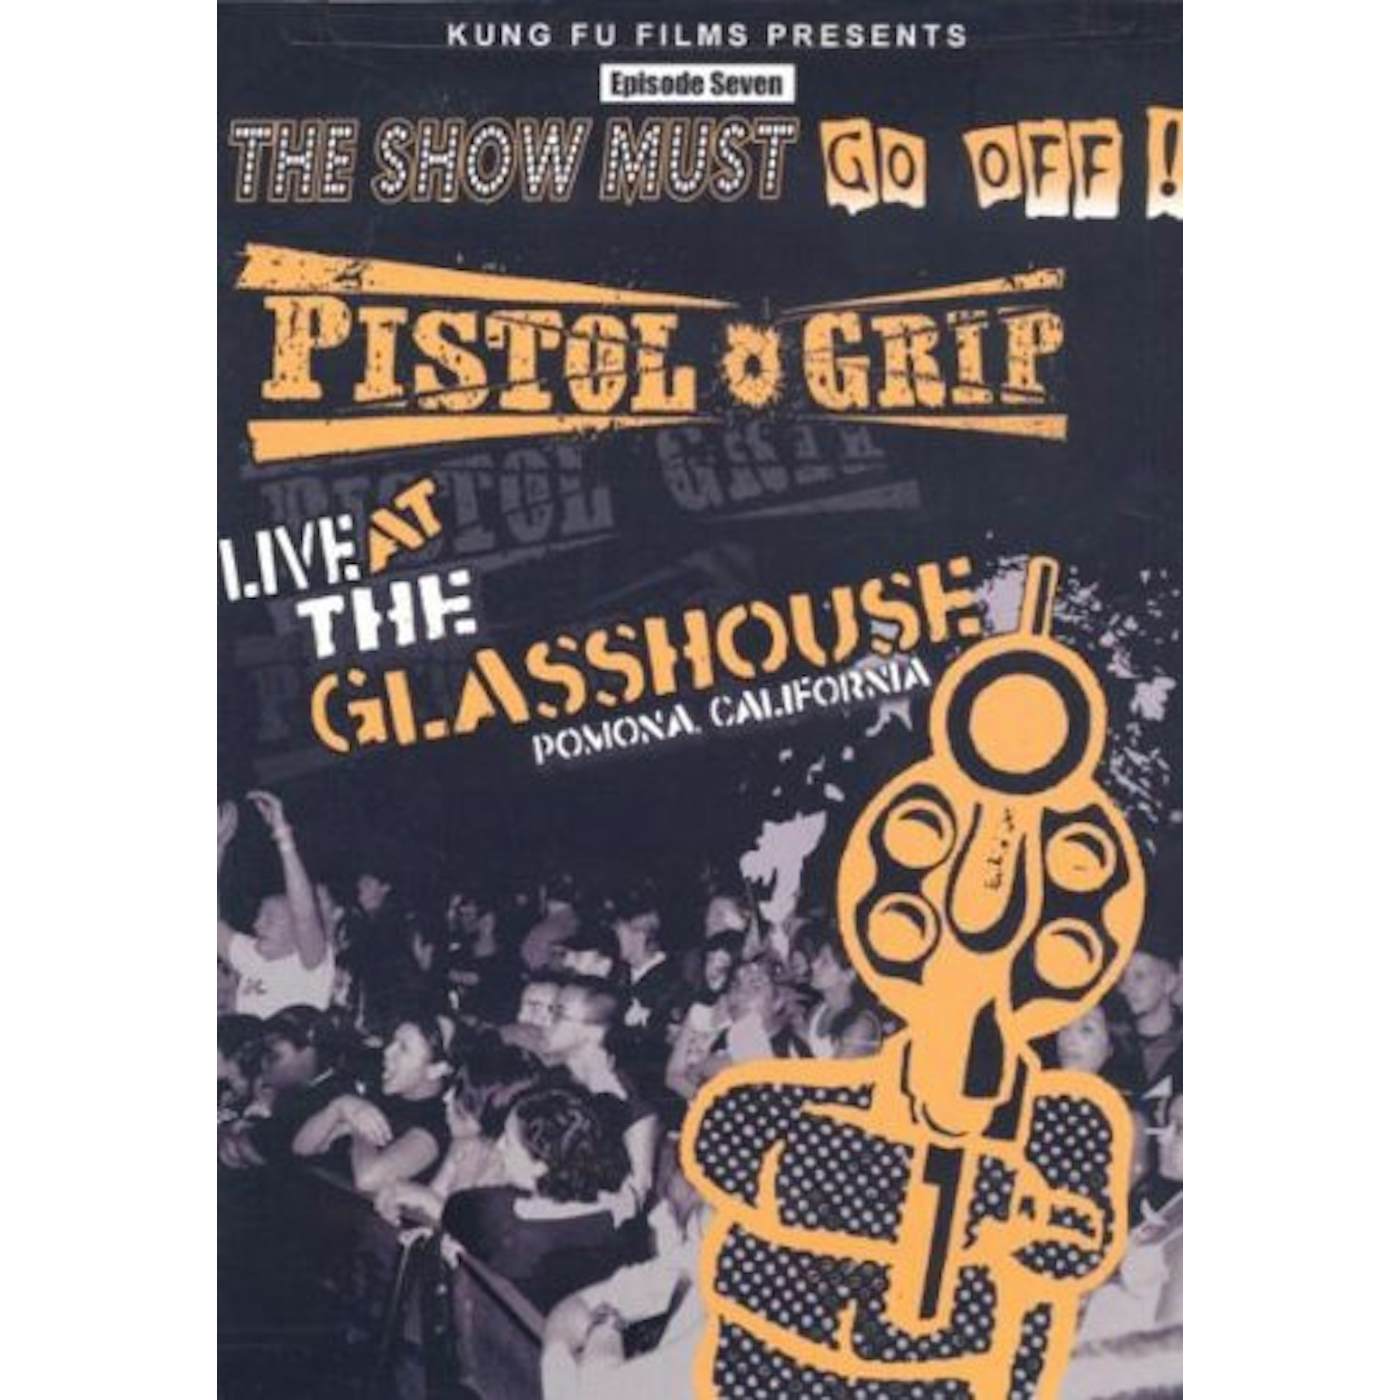 Pistol Grip LIVE AT THE GLASS HOUSE DVD